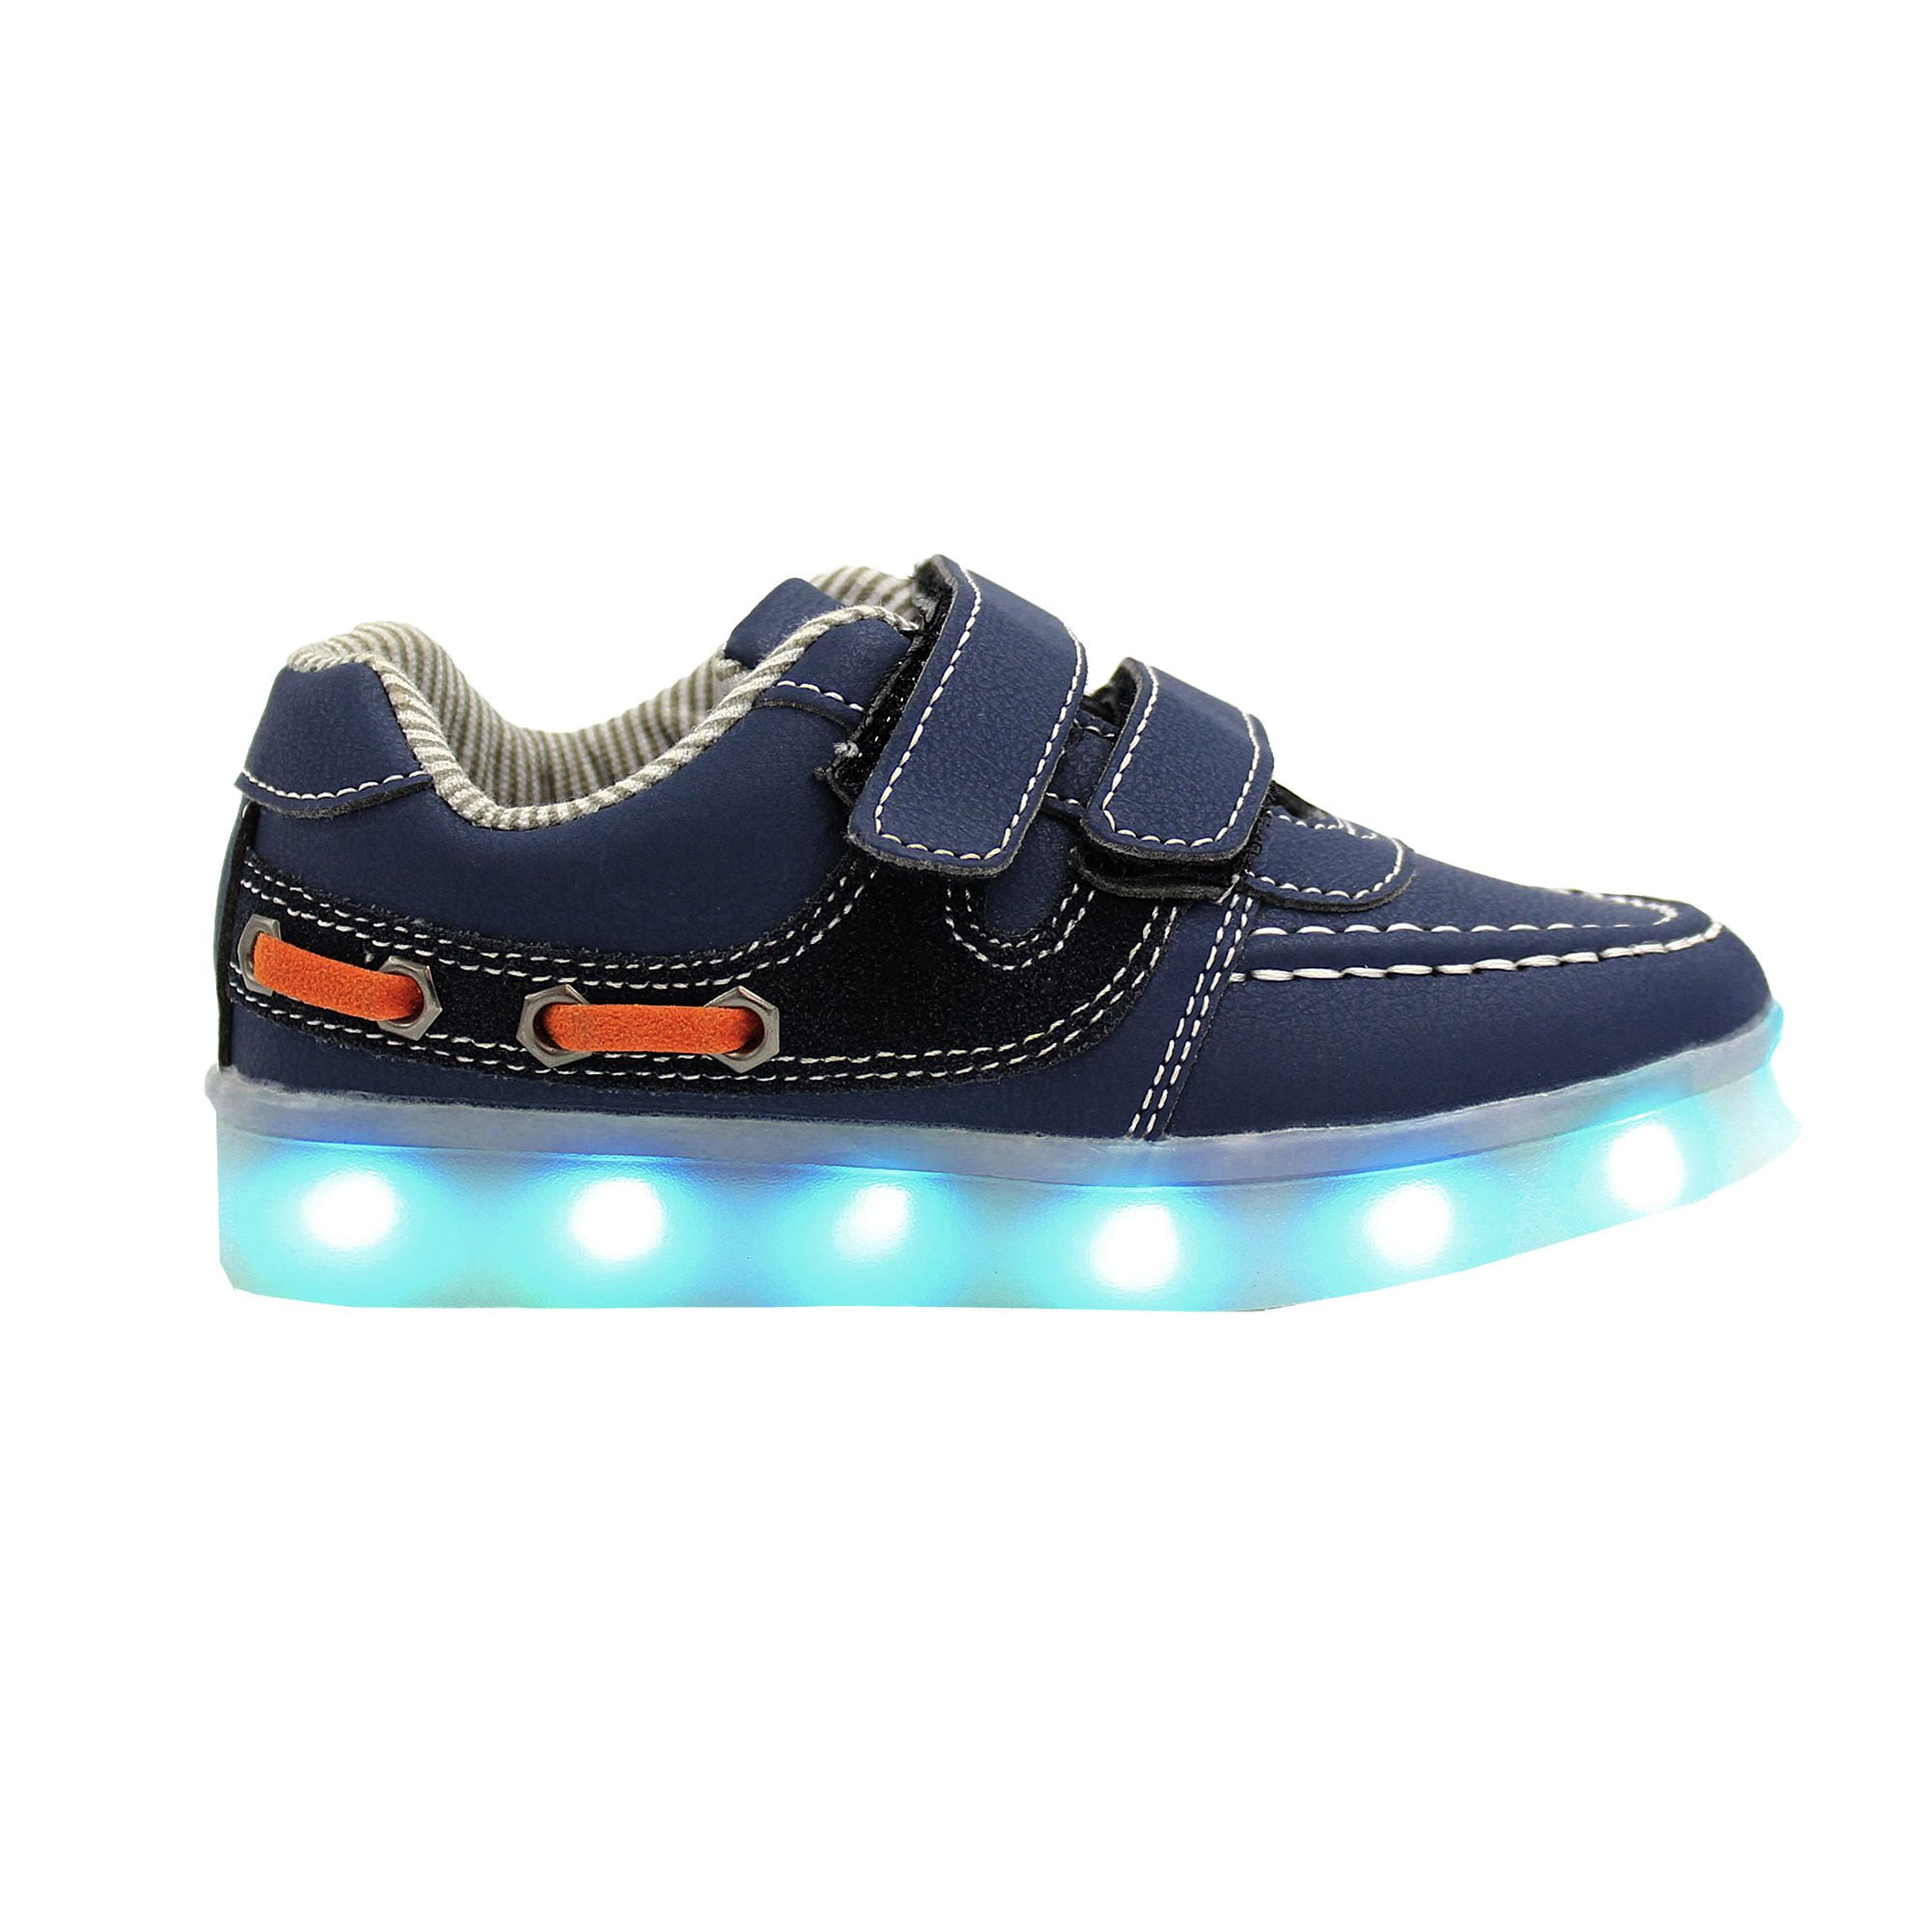 LED Light Up Sneakers Kids Low Top USB Charging Boys Girls Unisex Shoes ...